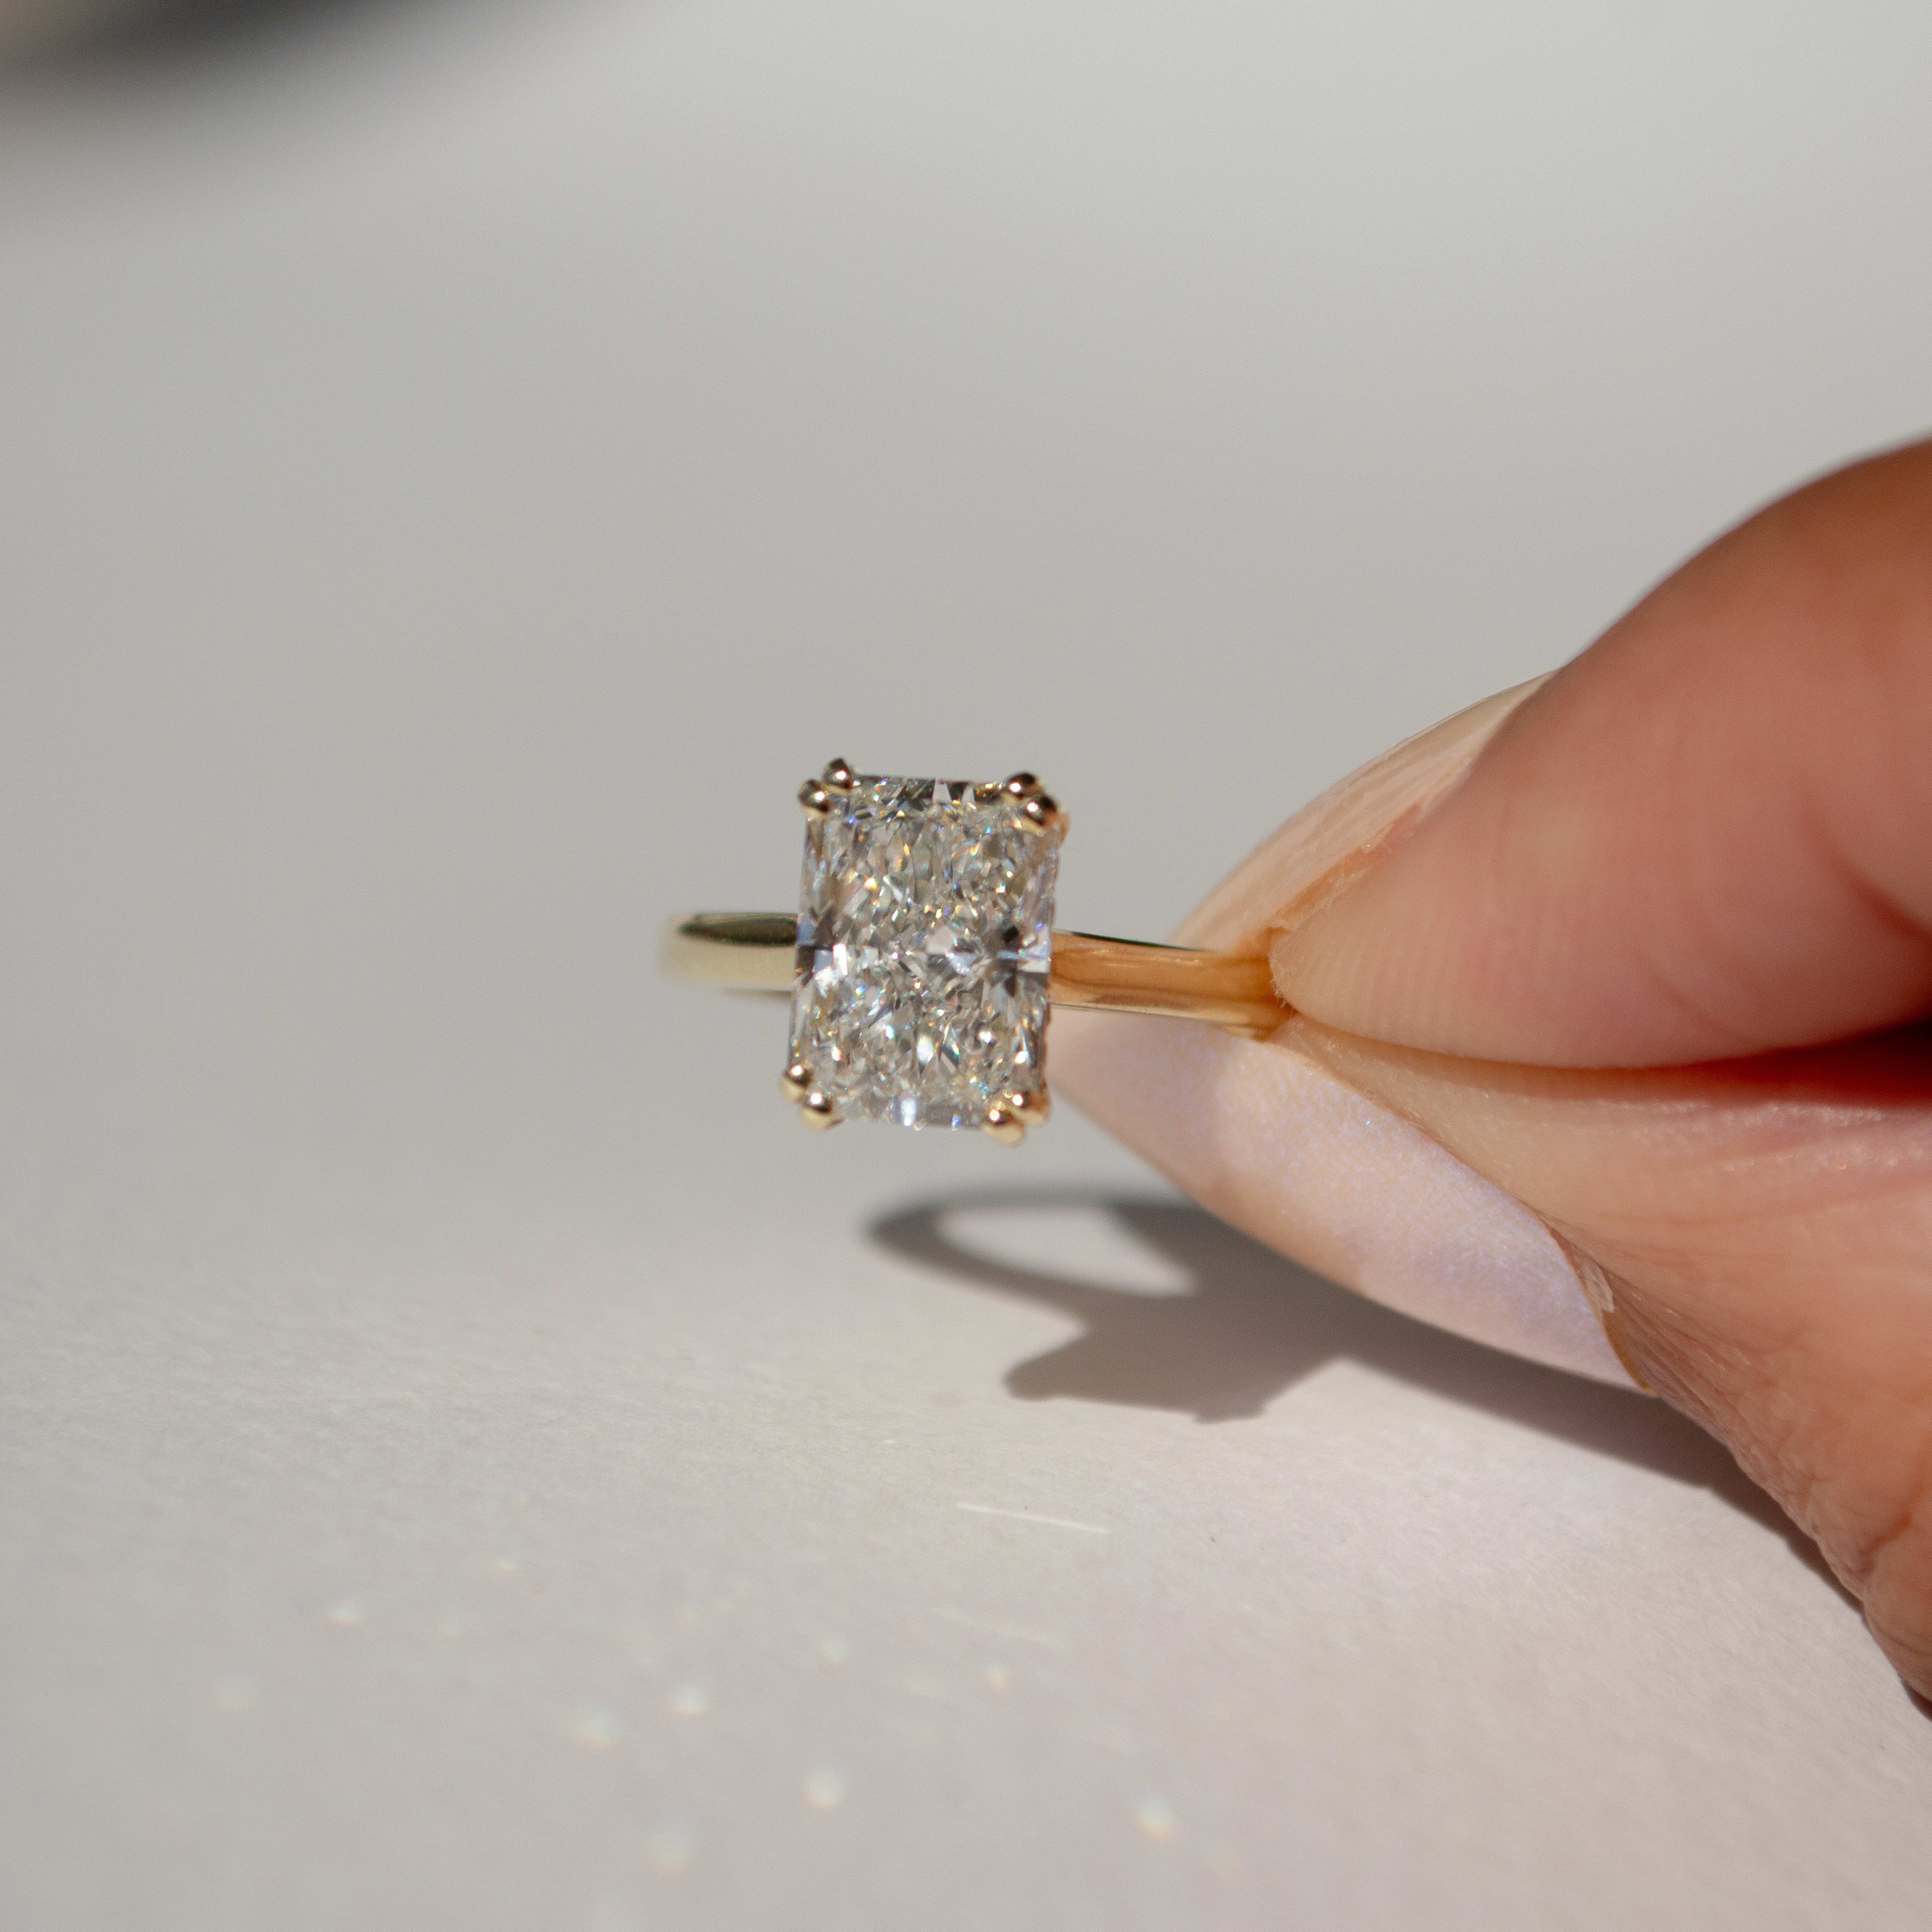 Radiant cut diamond with double prongs in a yellow gold band